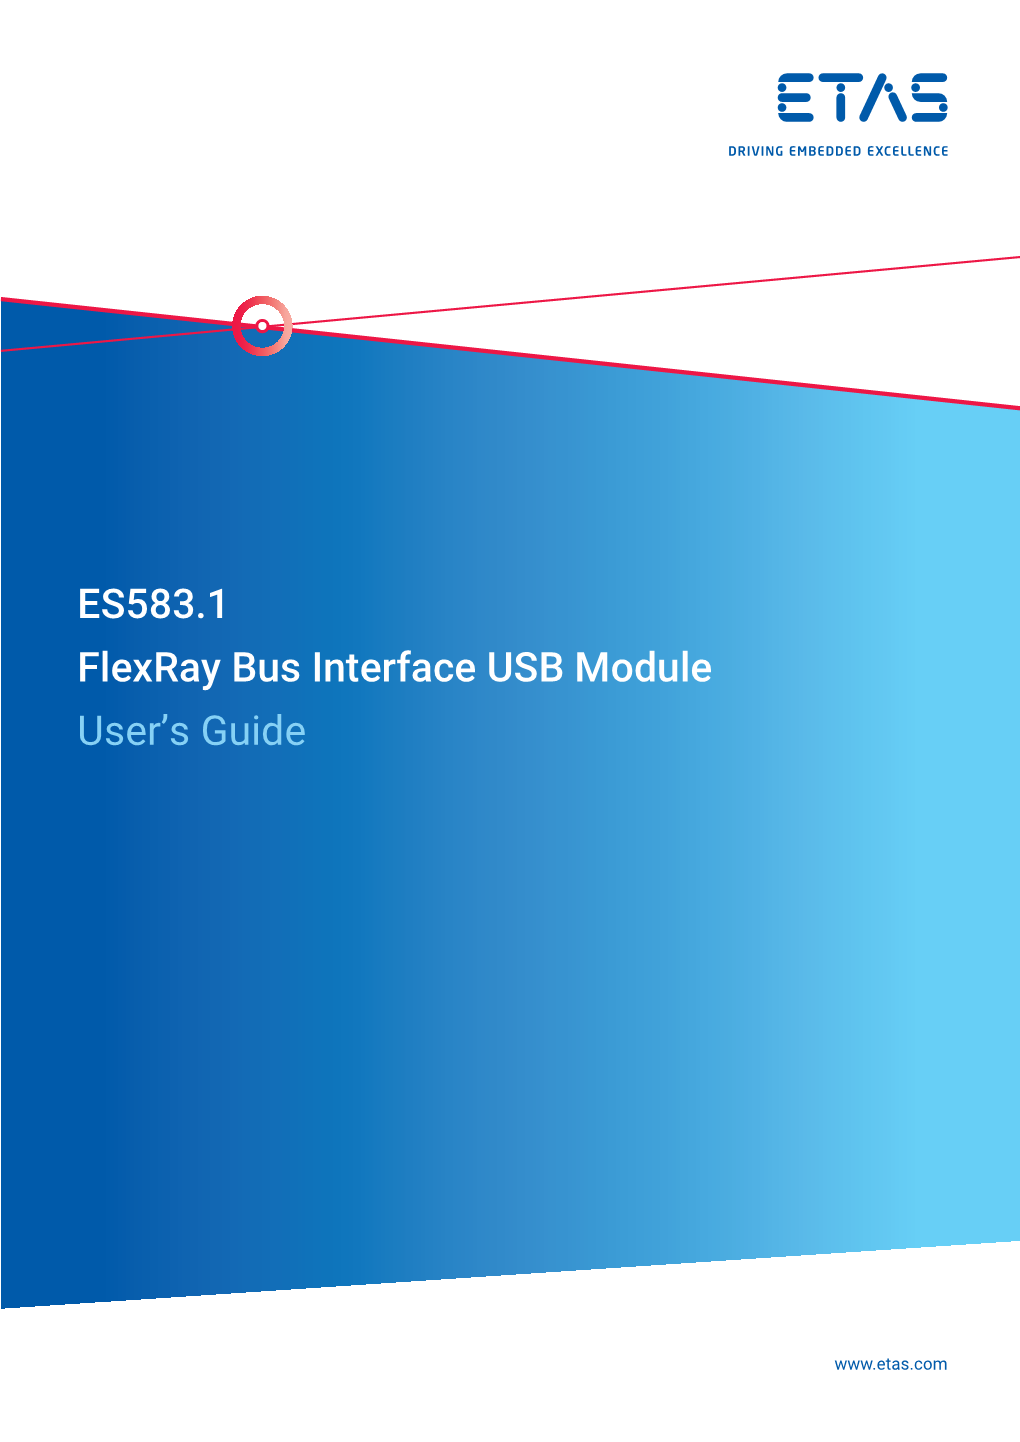 ES583.1 Flexray Bus Interface USB Module User's Guide